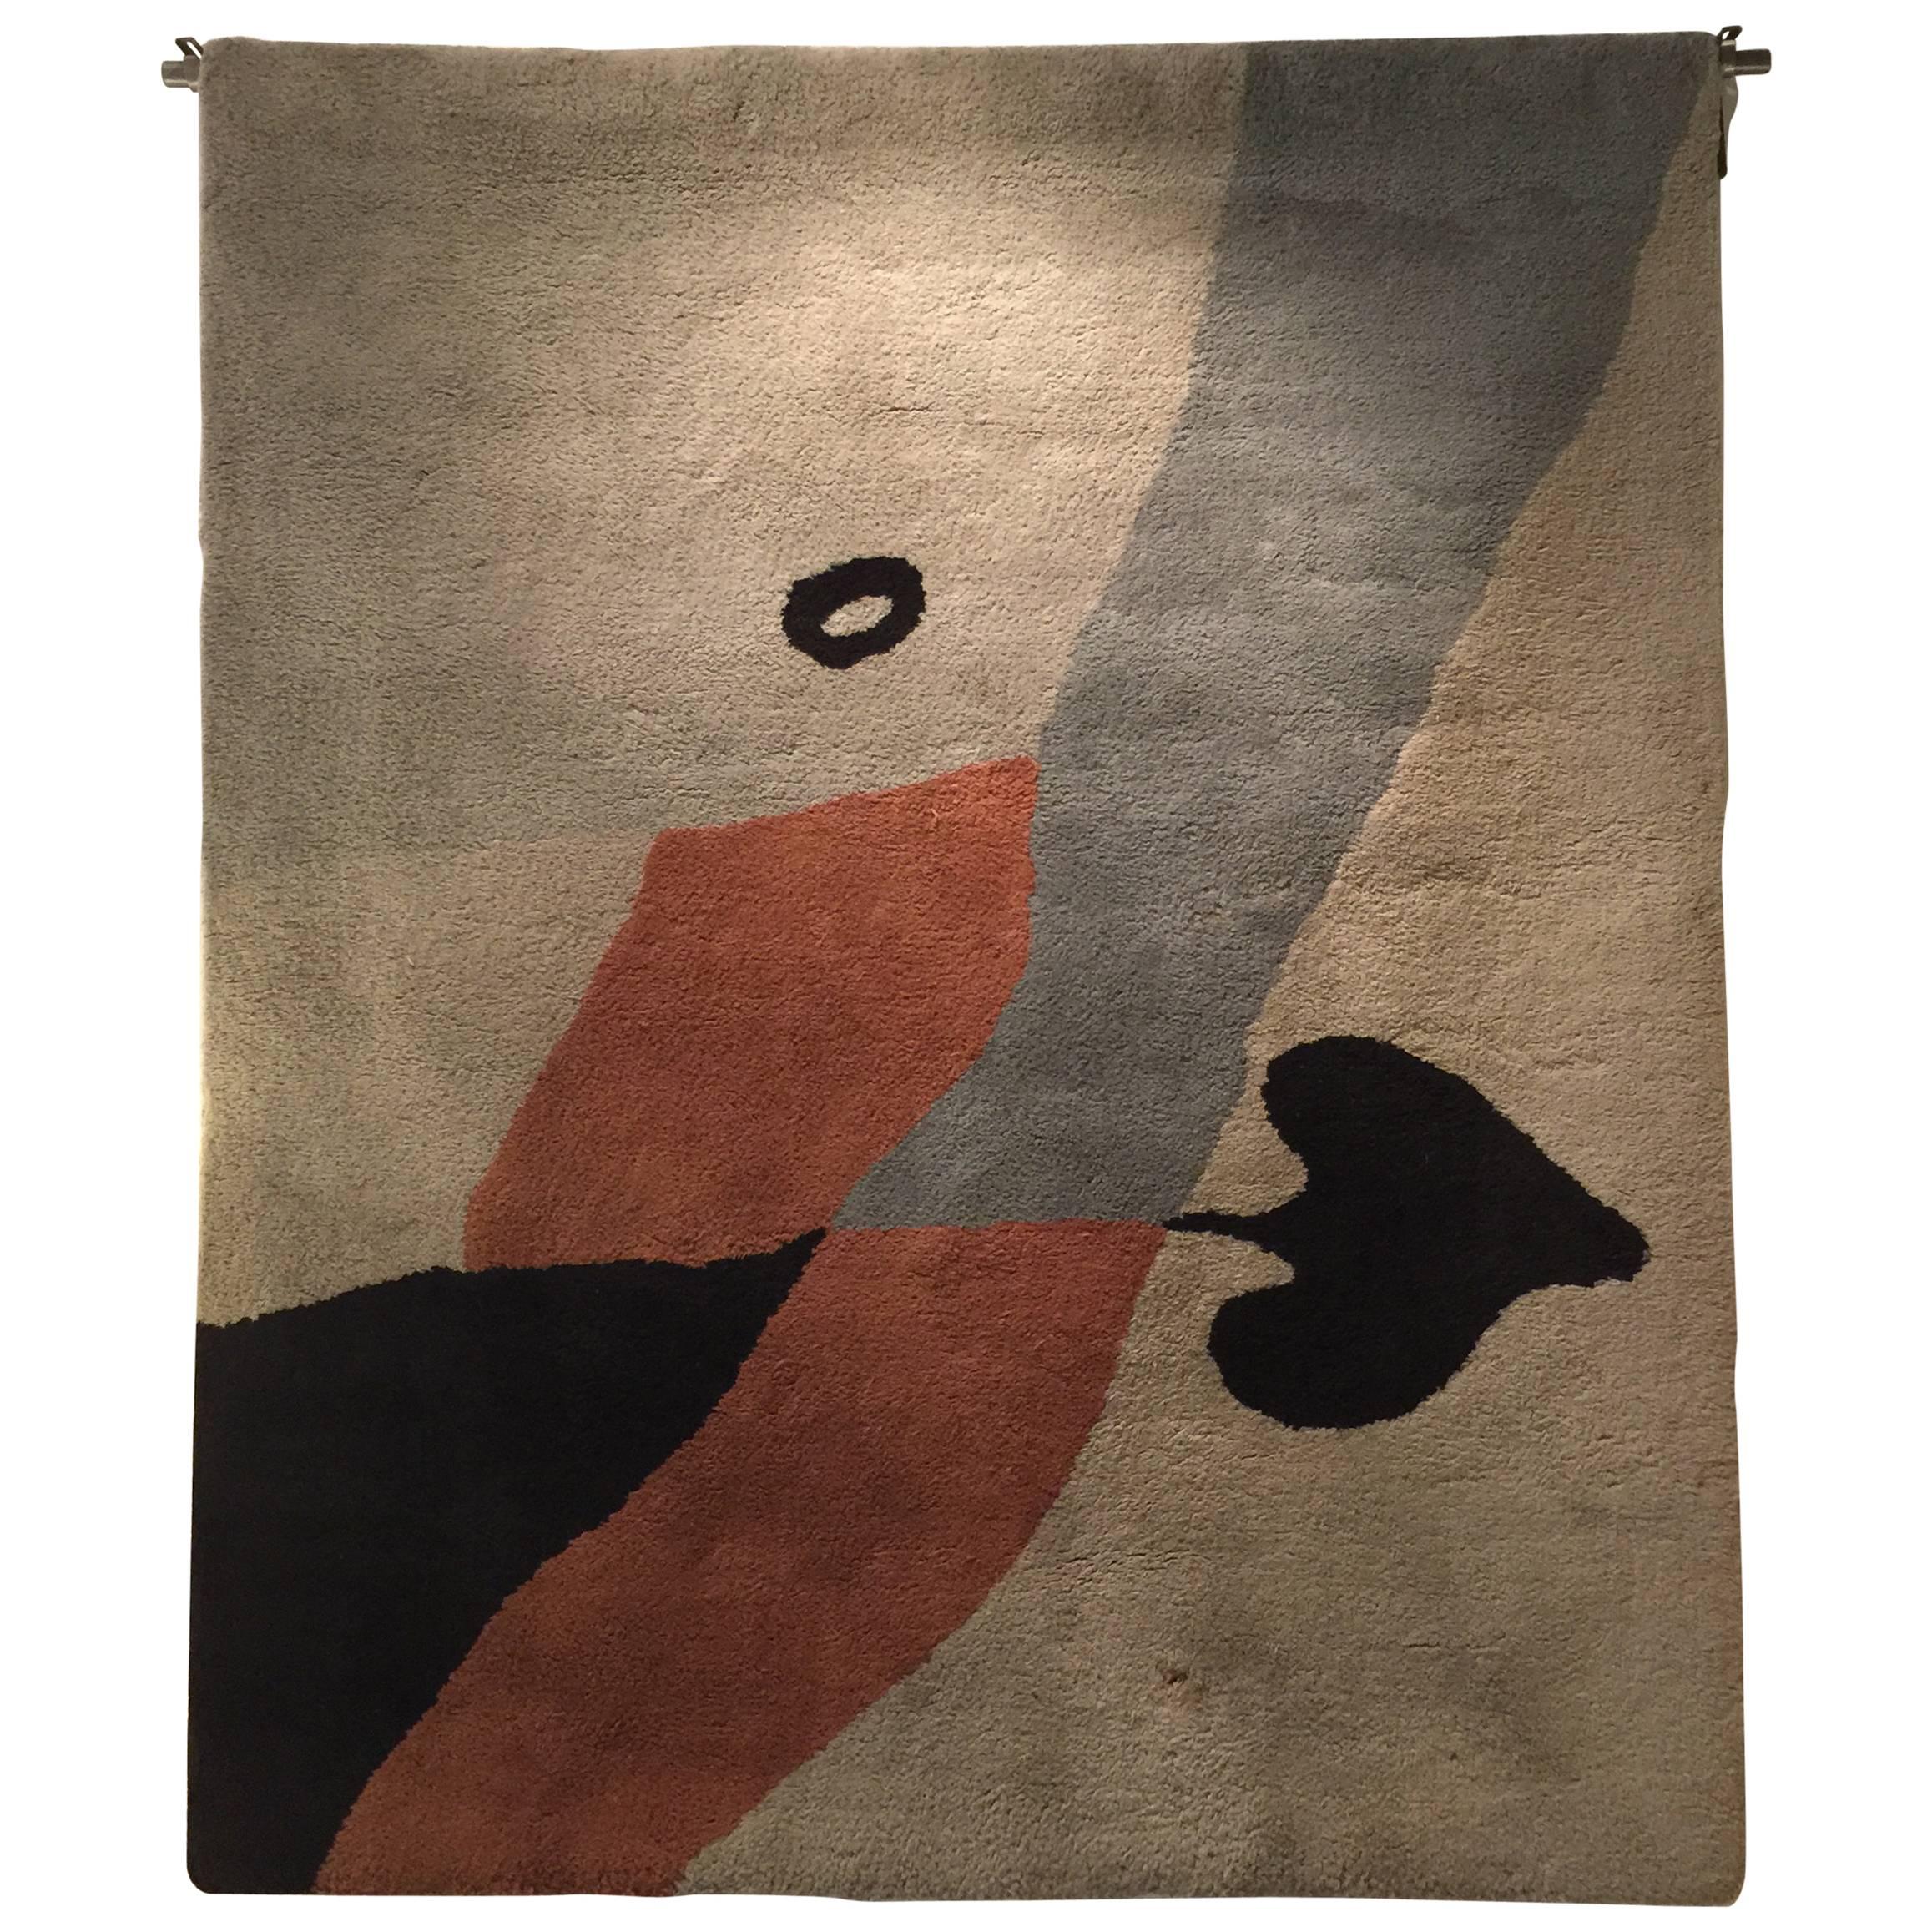 Rug/Wall Art by Jean Arp Edition Marie Cuttoli/Lucie Weill